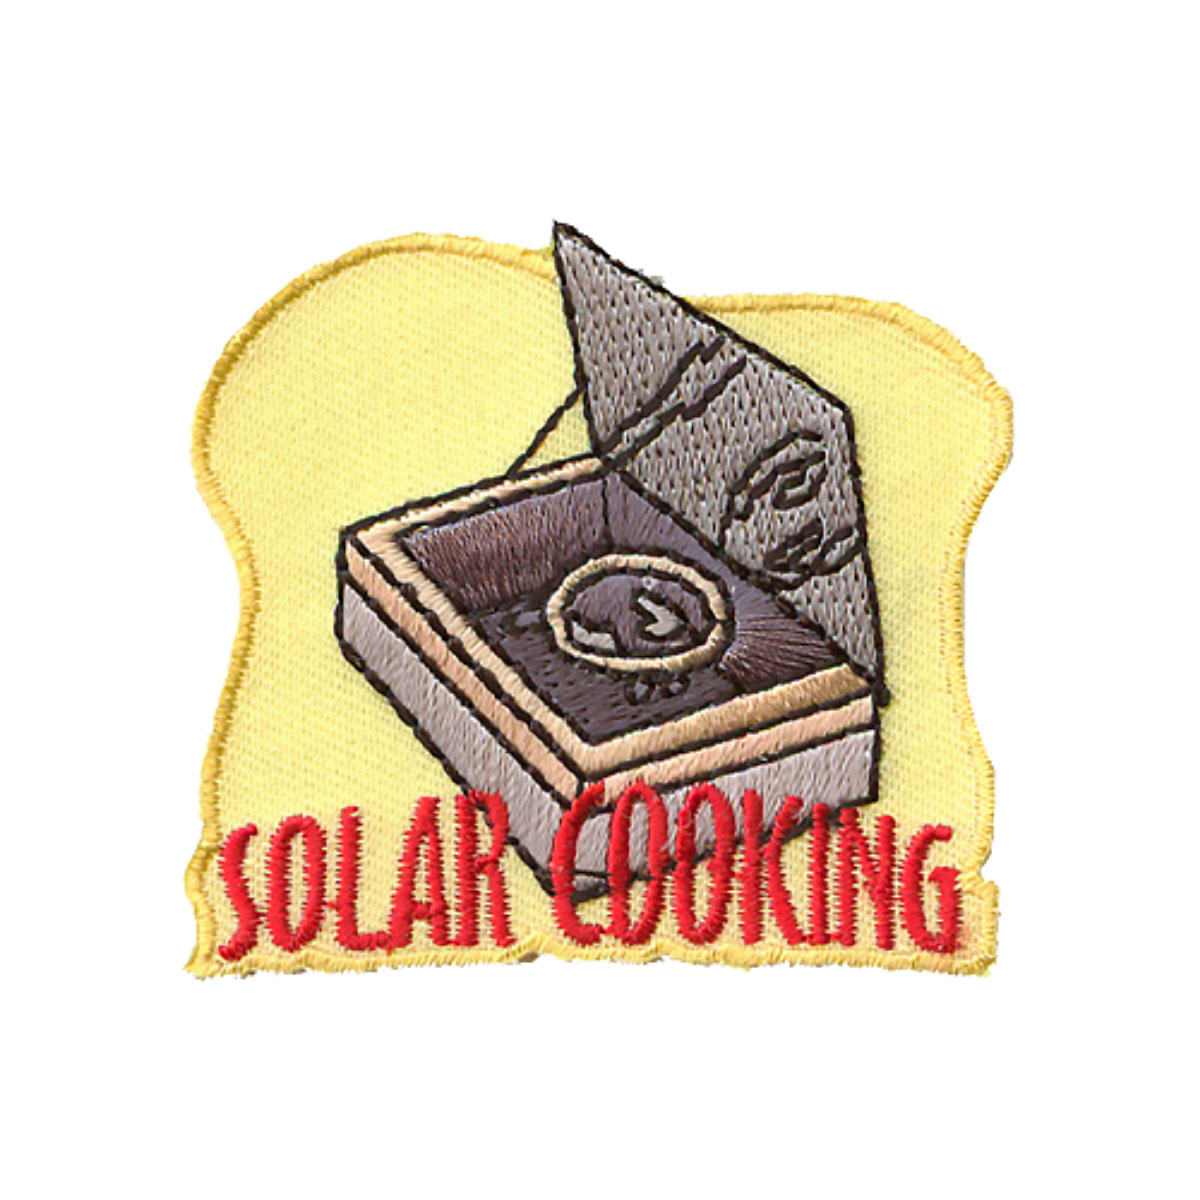 Solar Cooking - W